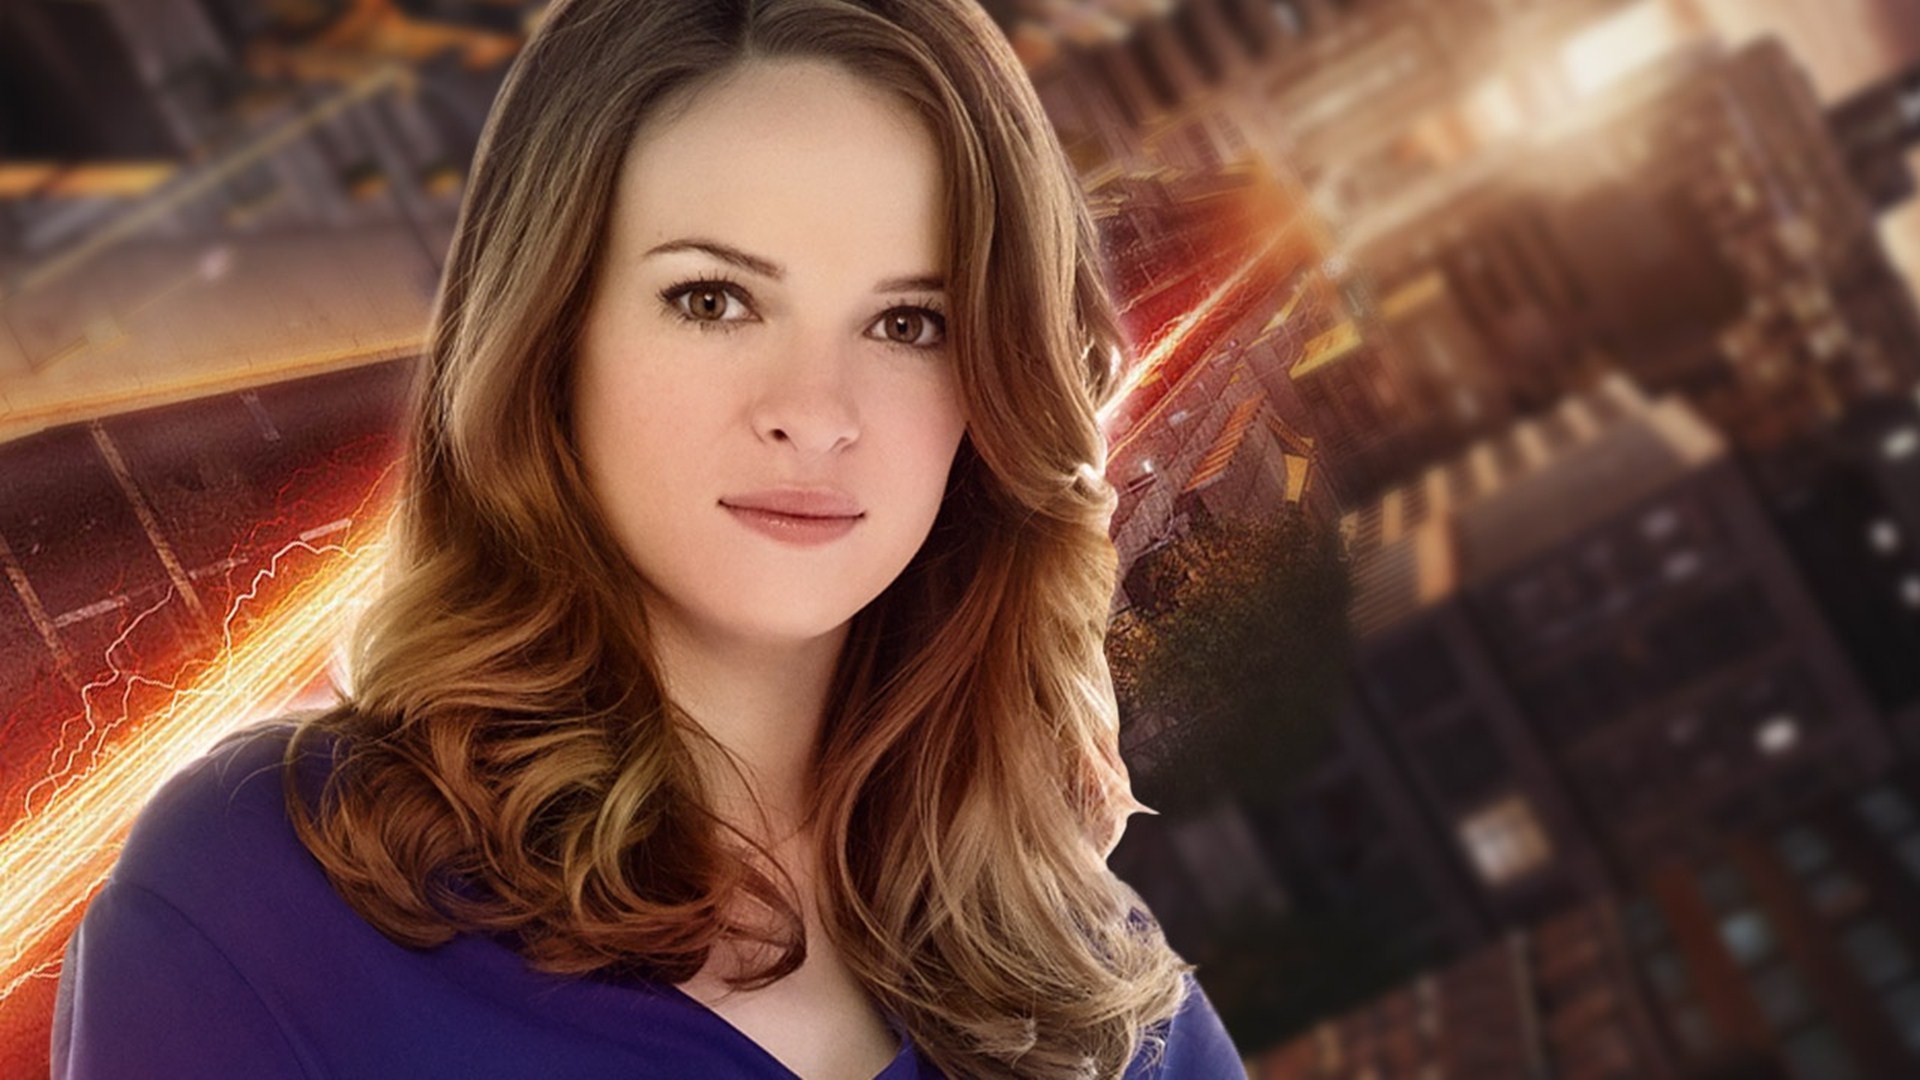 Danielle Panabaker Wallpapers Images Photos Pictures Backgrounds